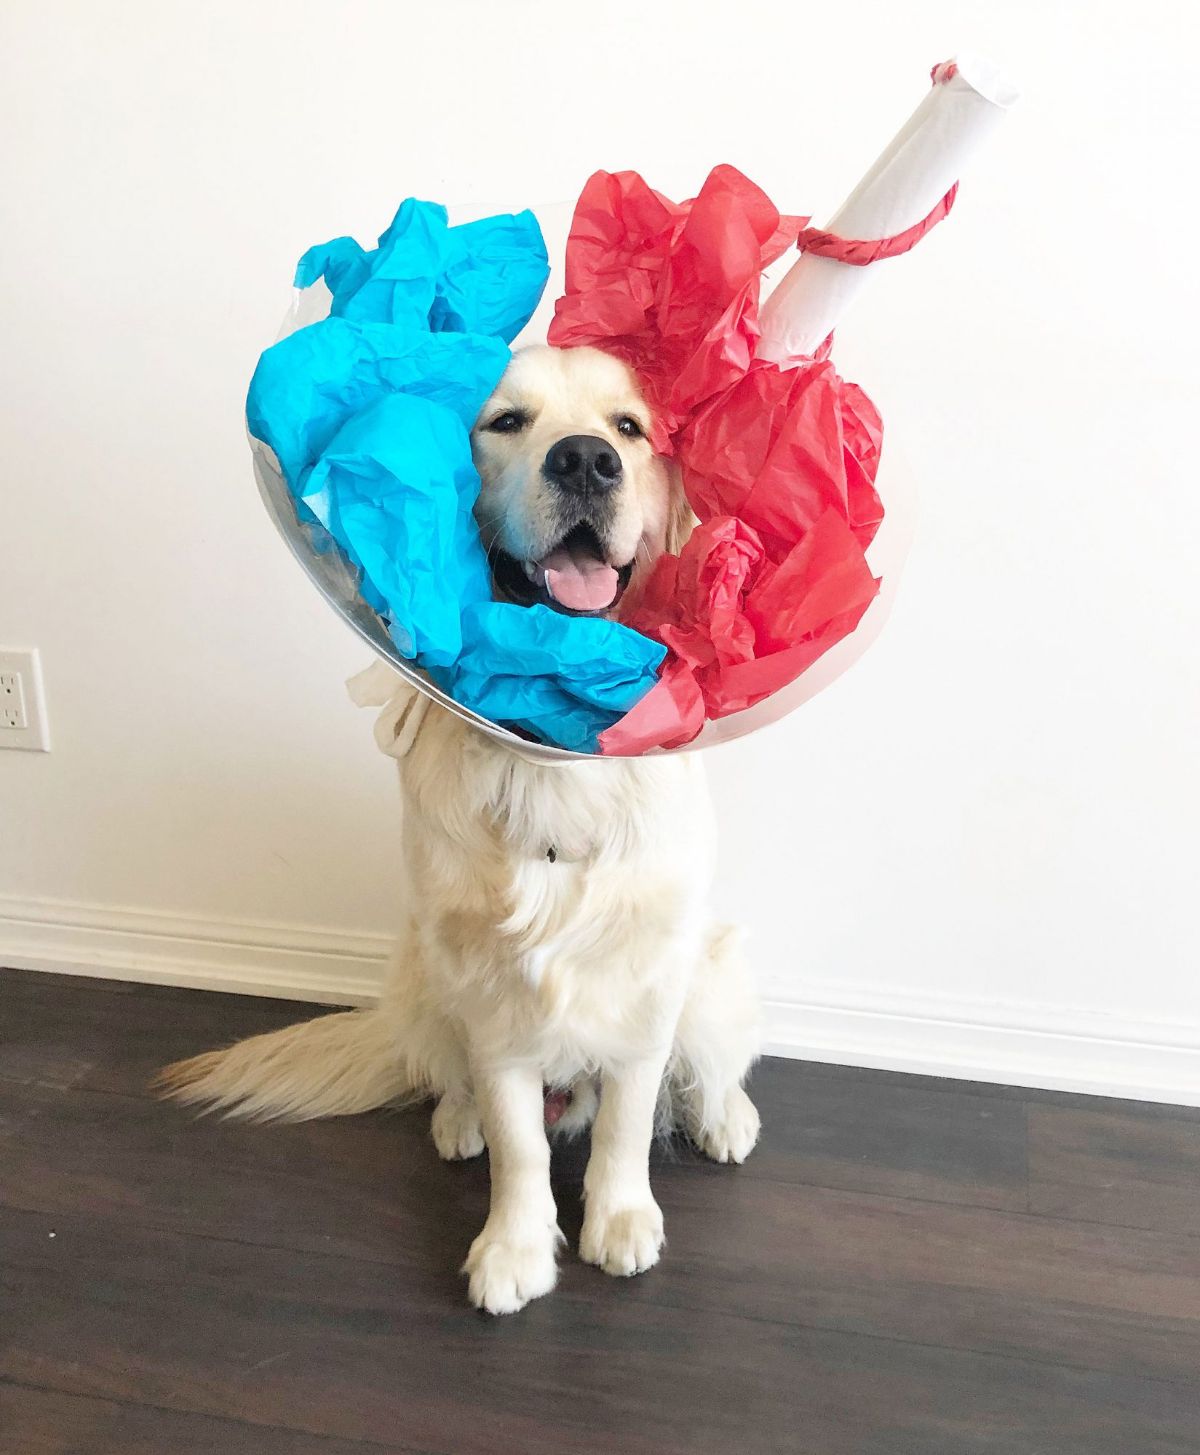 golden retriever in a white cone of shame with blue and red crepe paper inside it and a white cardboard straw sticking out